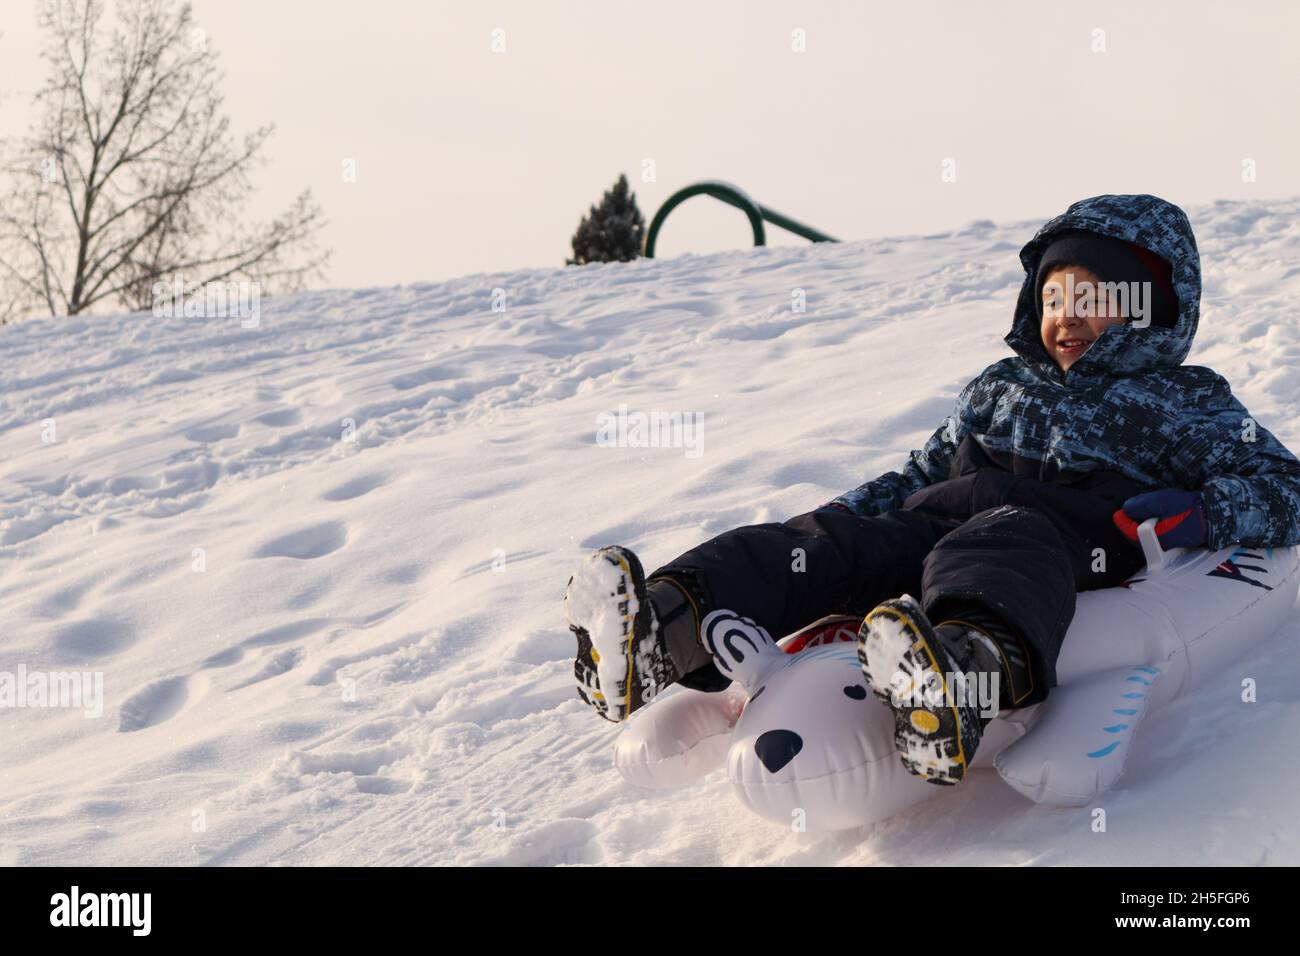 Boy Sliding Down Snow Slope High-Res Stock Photo - Getty Images